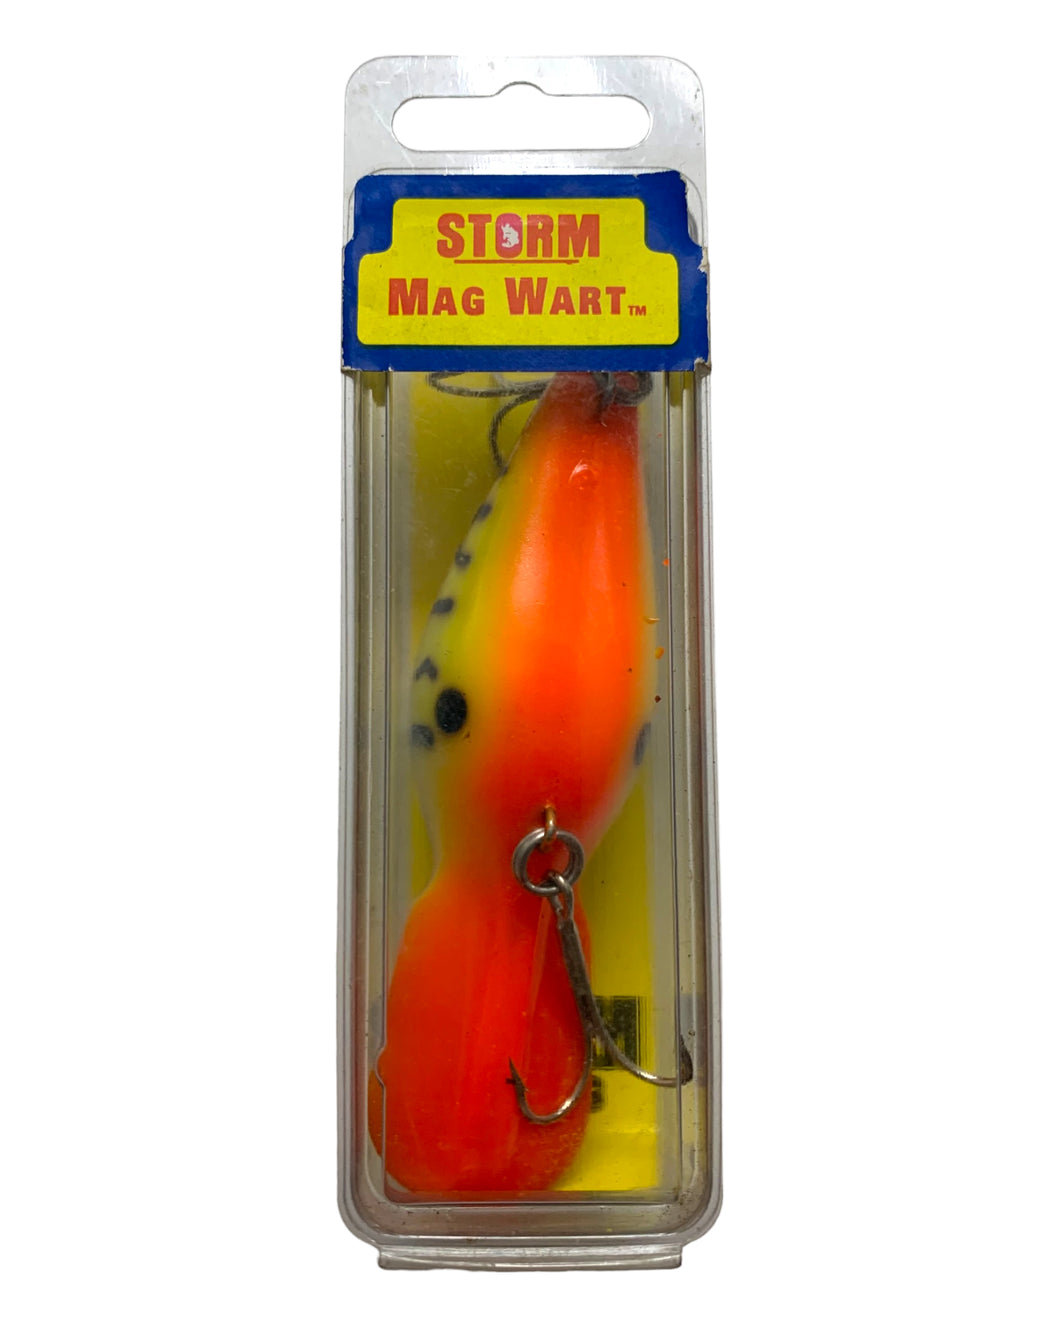 STORM LURES MAG WART Fishing Lure AV45 BROWN SCALE CRAYFISH – Toad Tackle